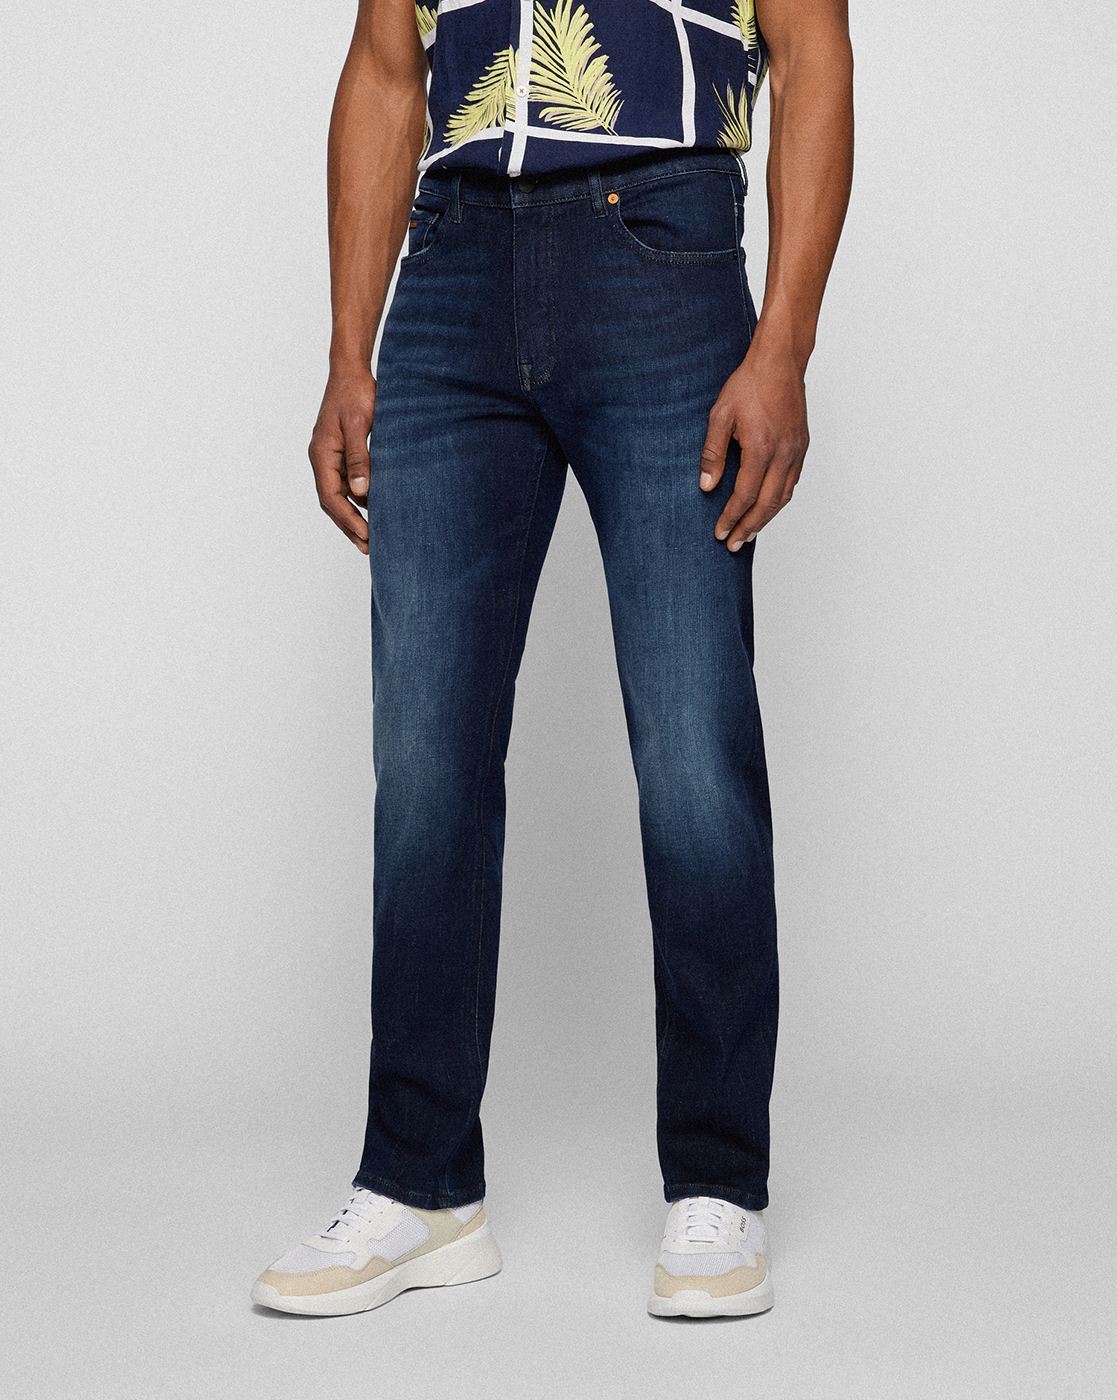 Buy BOSS Relaxed-Fit Jeans In Blue Super-Stretch Denim, Blue Color Men